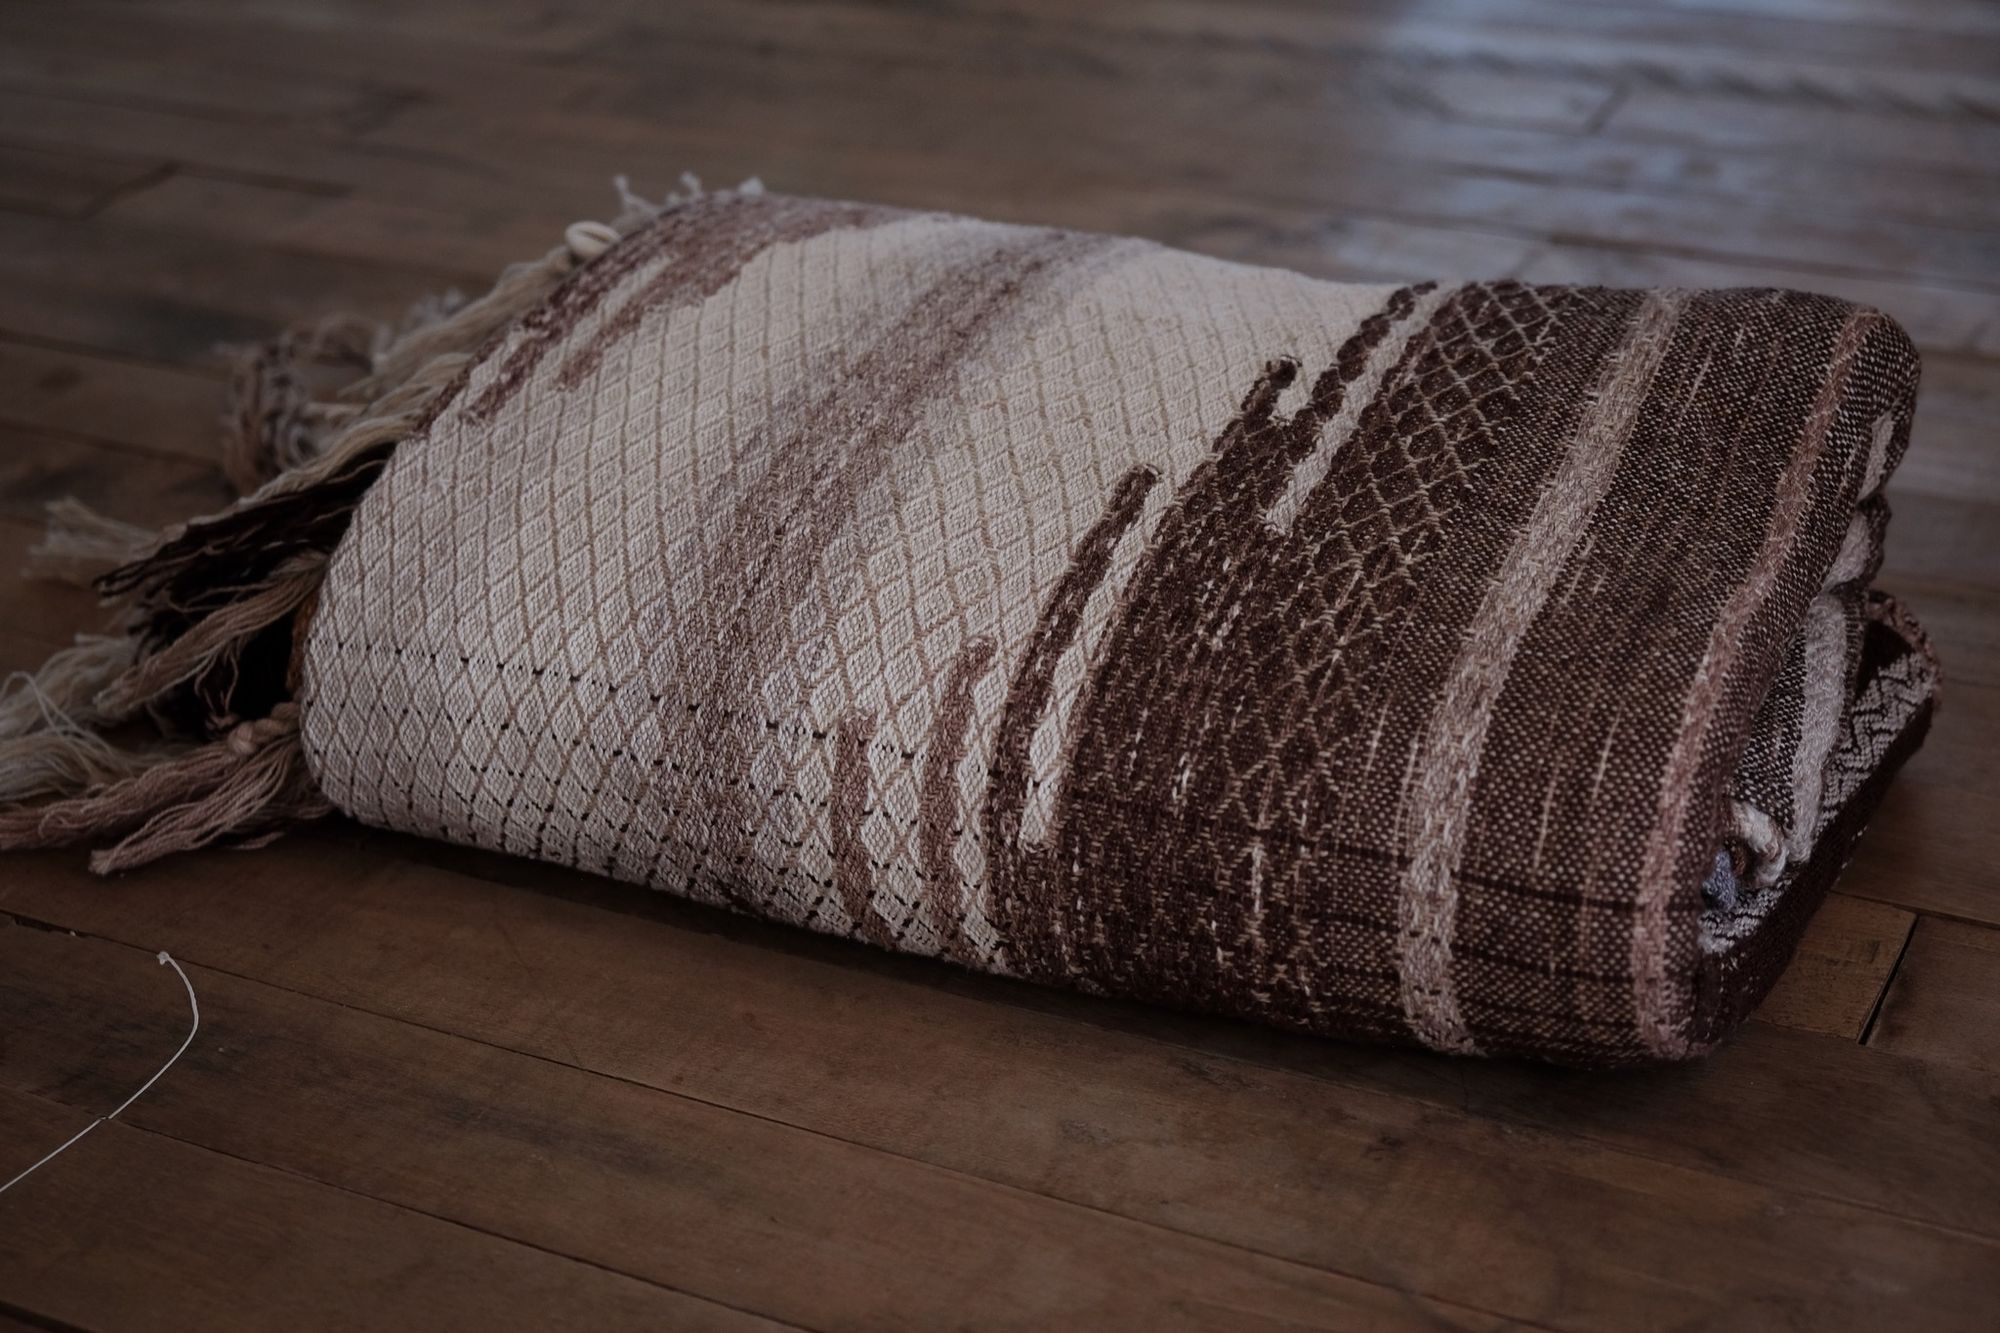 Handwoven fabric with a diamond pattern in brown, cream, white and rainbow colors